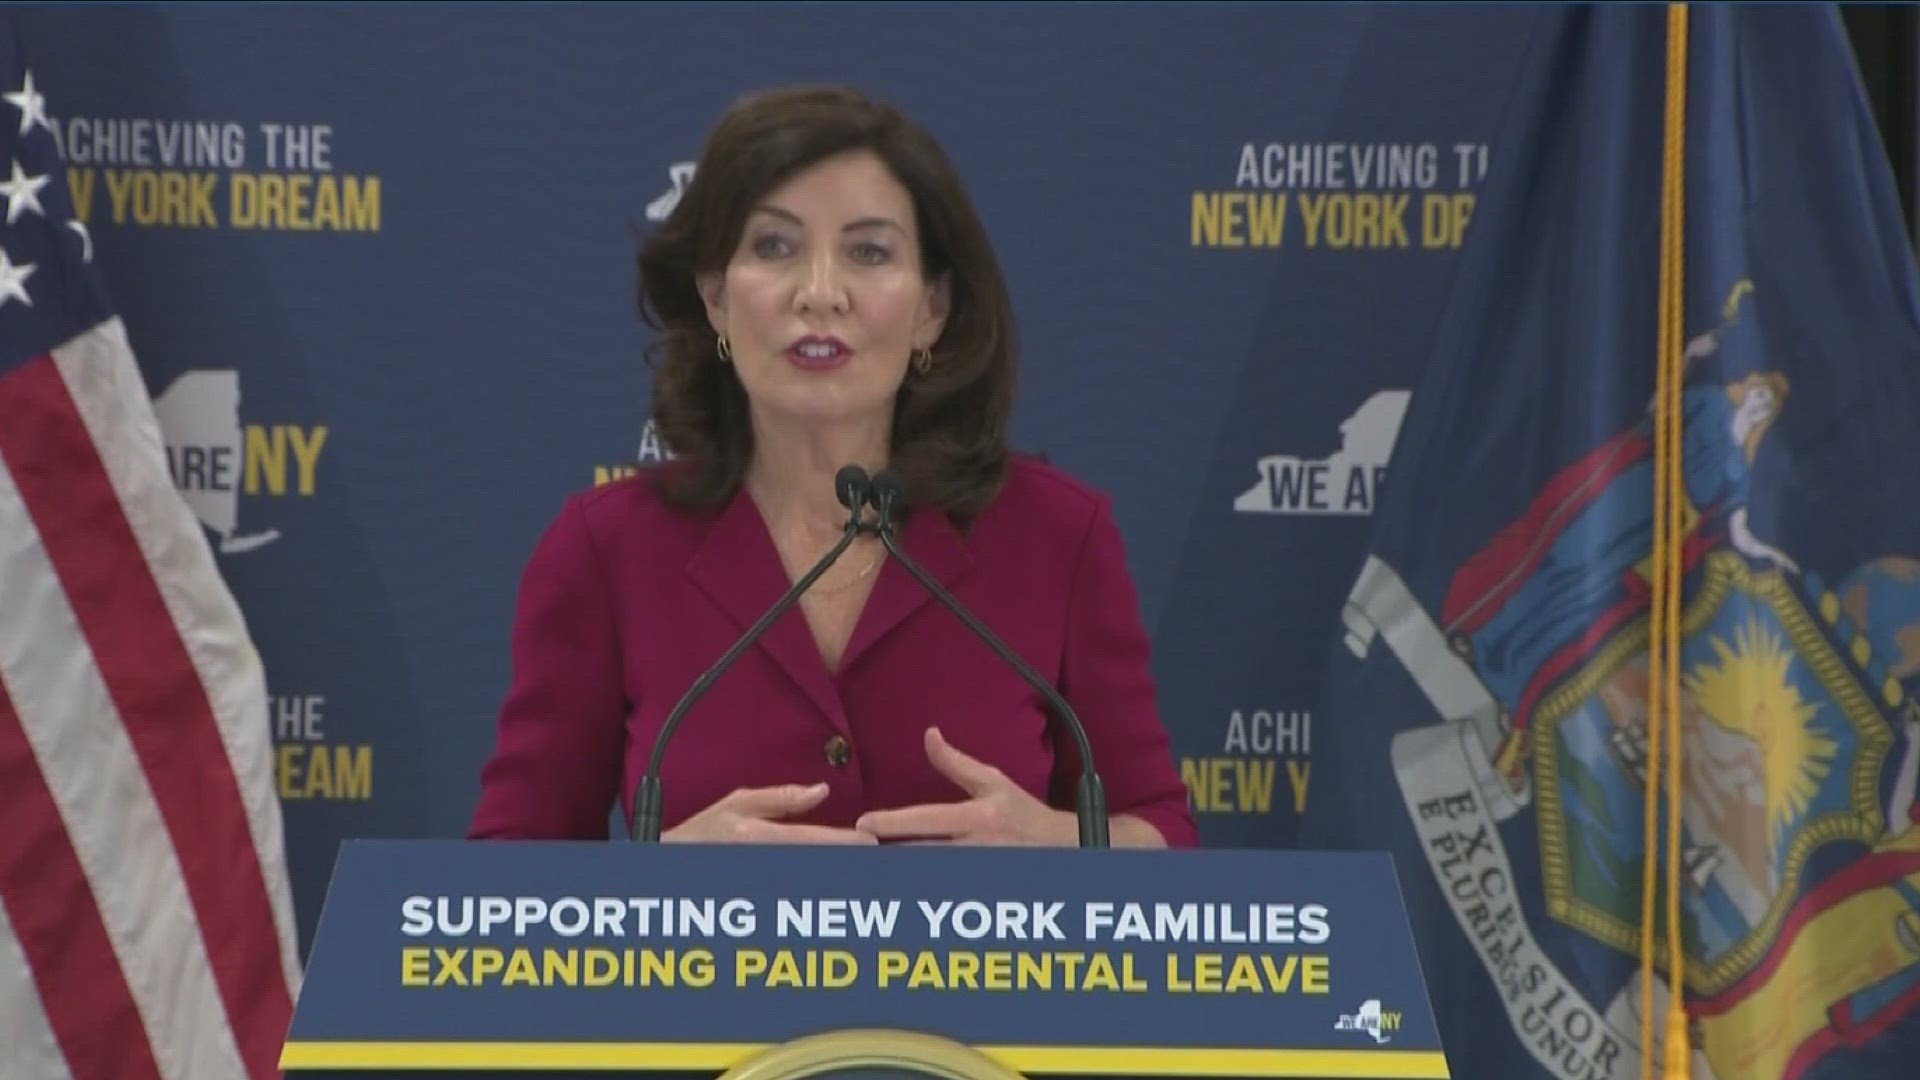 Governor Kathy Hochul announced expanded paid parental leave for more than 80-percent of state employees ... that covers *MORE time off for moms *and dads.